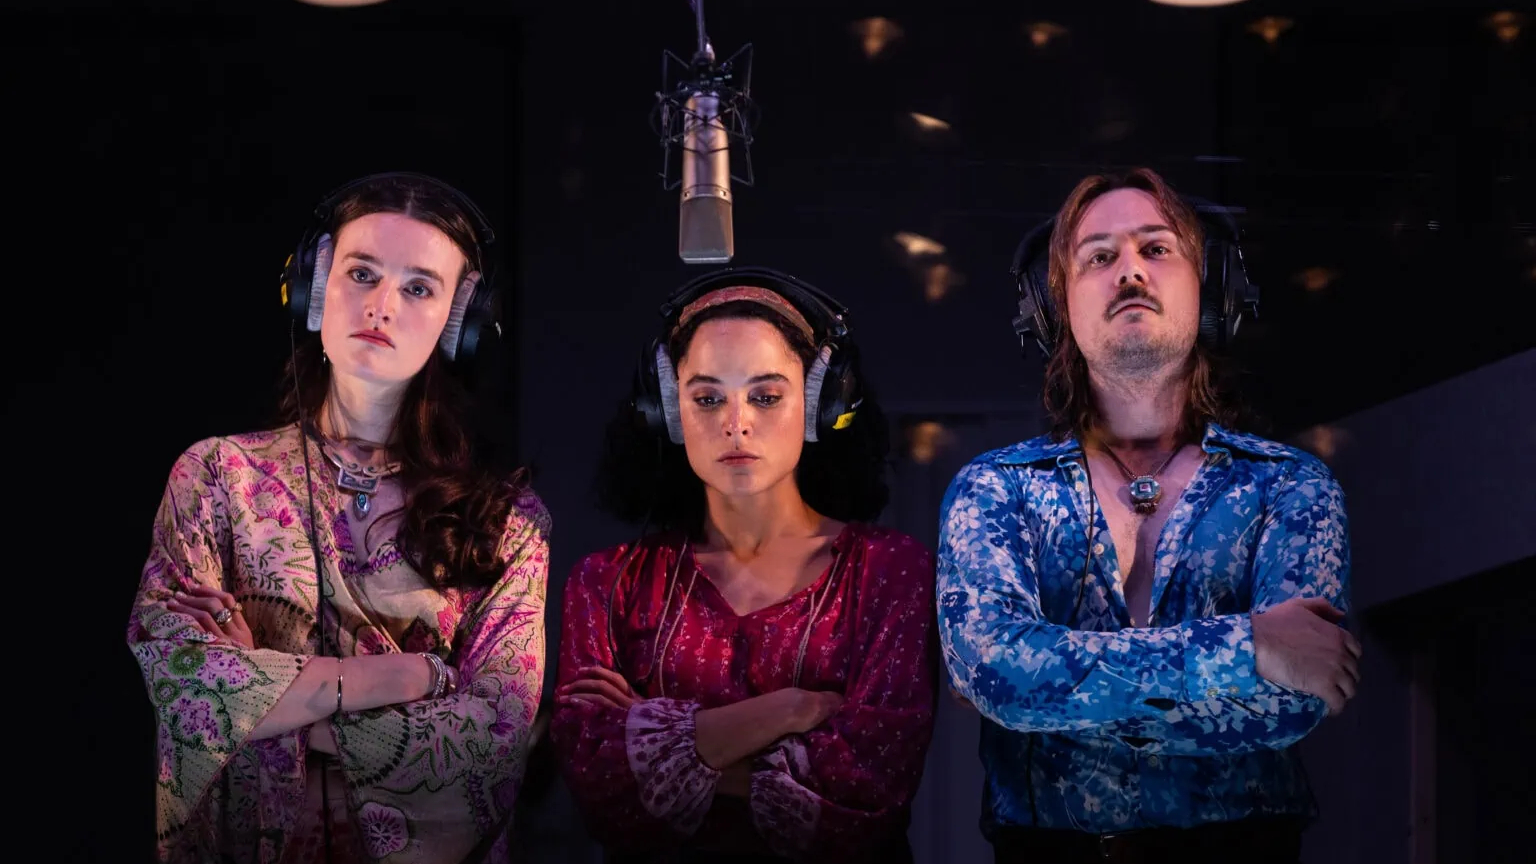 three members of the Stereophonic cast in a recording booth